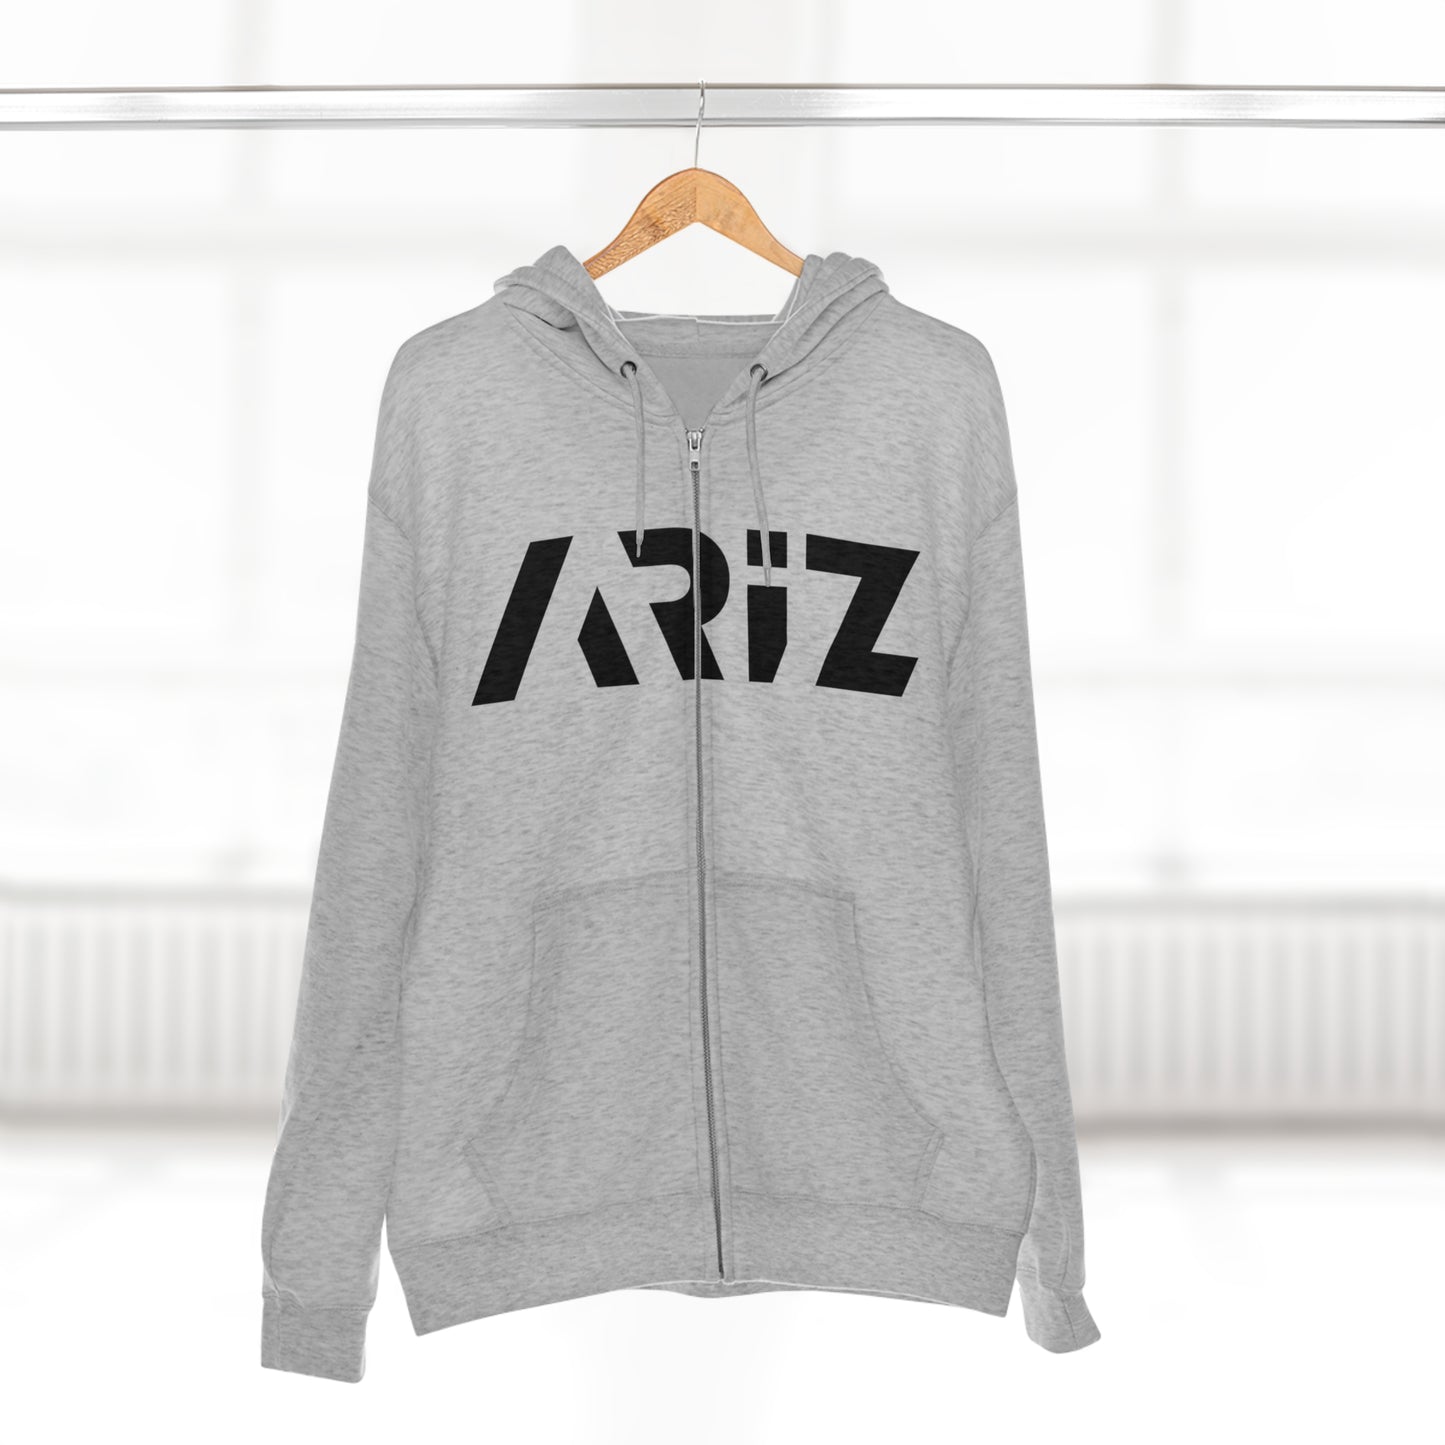 Front view of a grey hoodie featuring the ARIZ brand logo. Unisex design made from 100% cotton, proudly made in the USA.